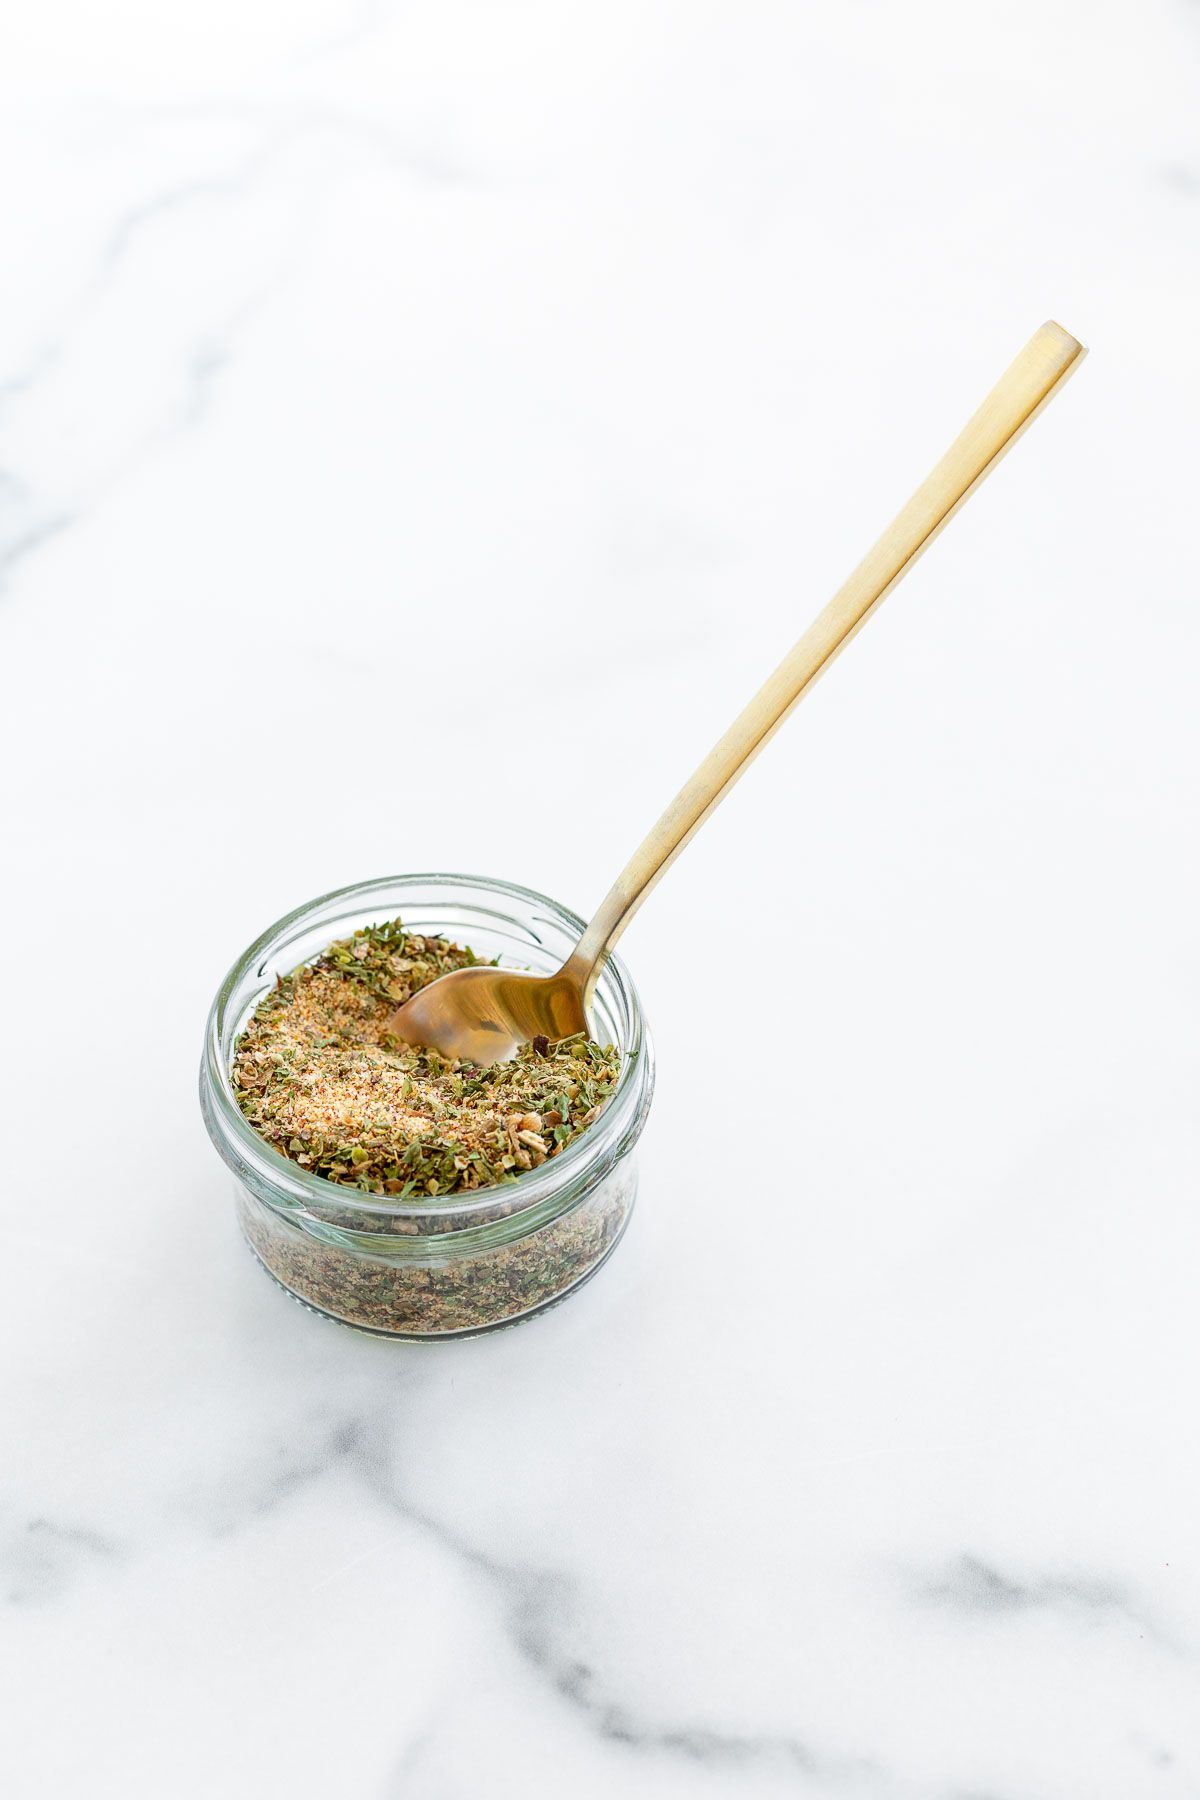 A small glass container filled with all purpose seasoning, gold spoon in the jar.